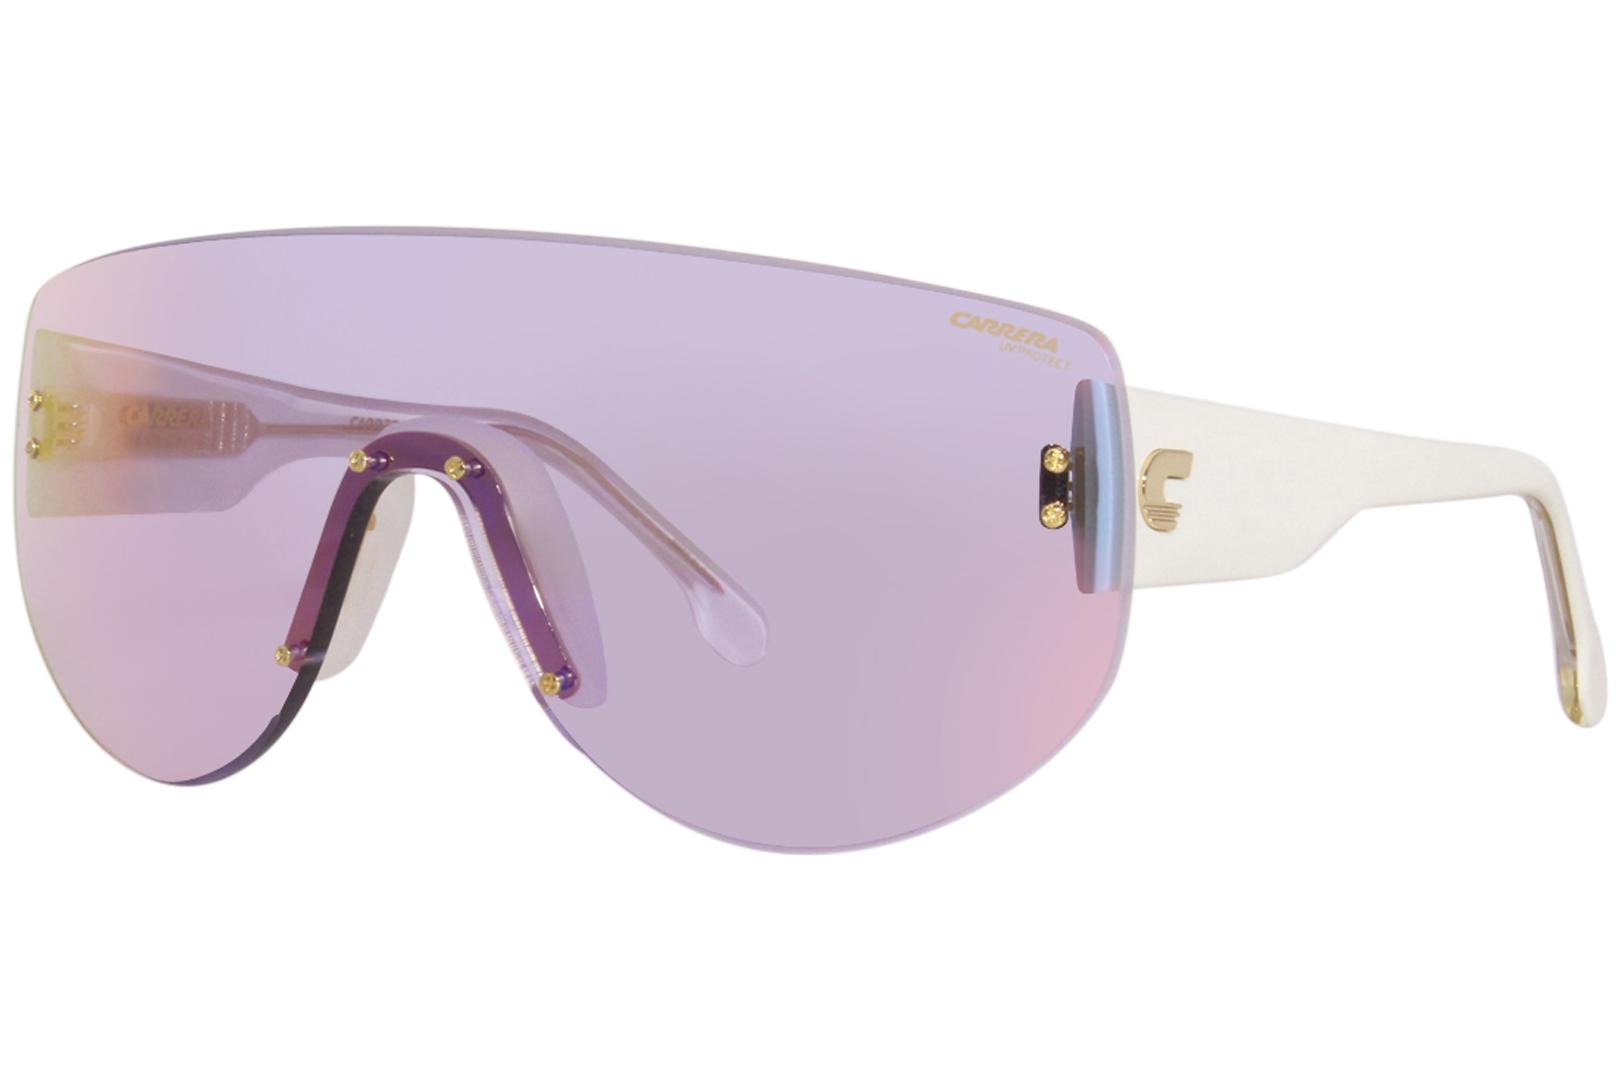 Carrera Flaglab-12 2UCTE Special Edition Sunglasses Women's Violet/White  99mm 